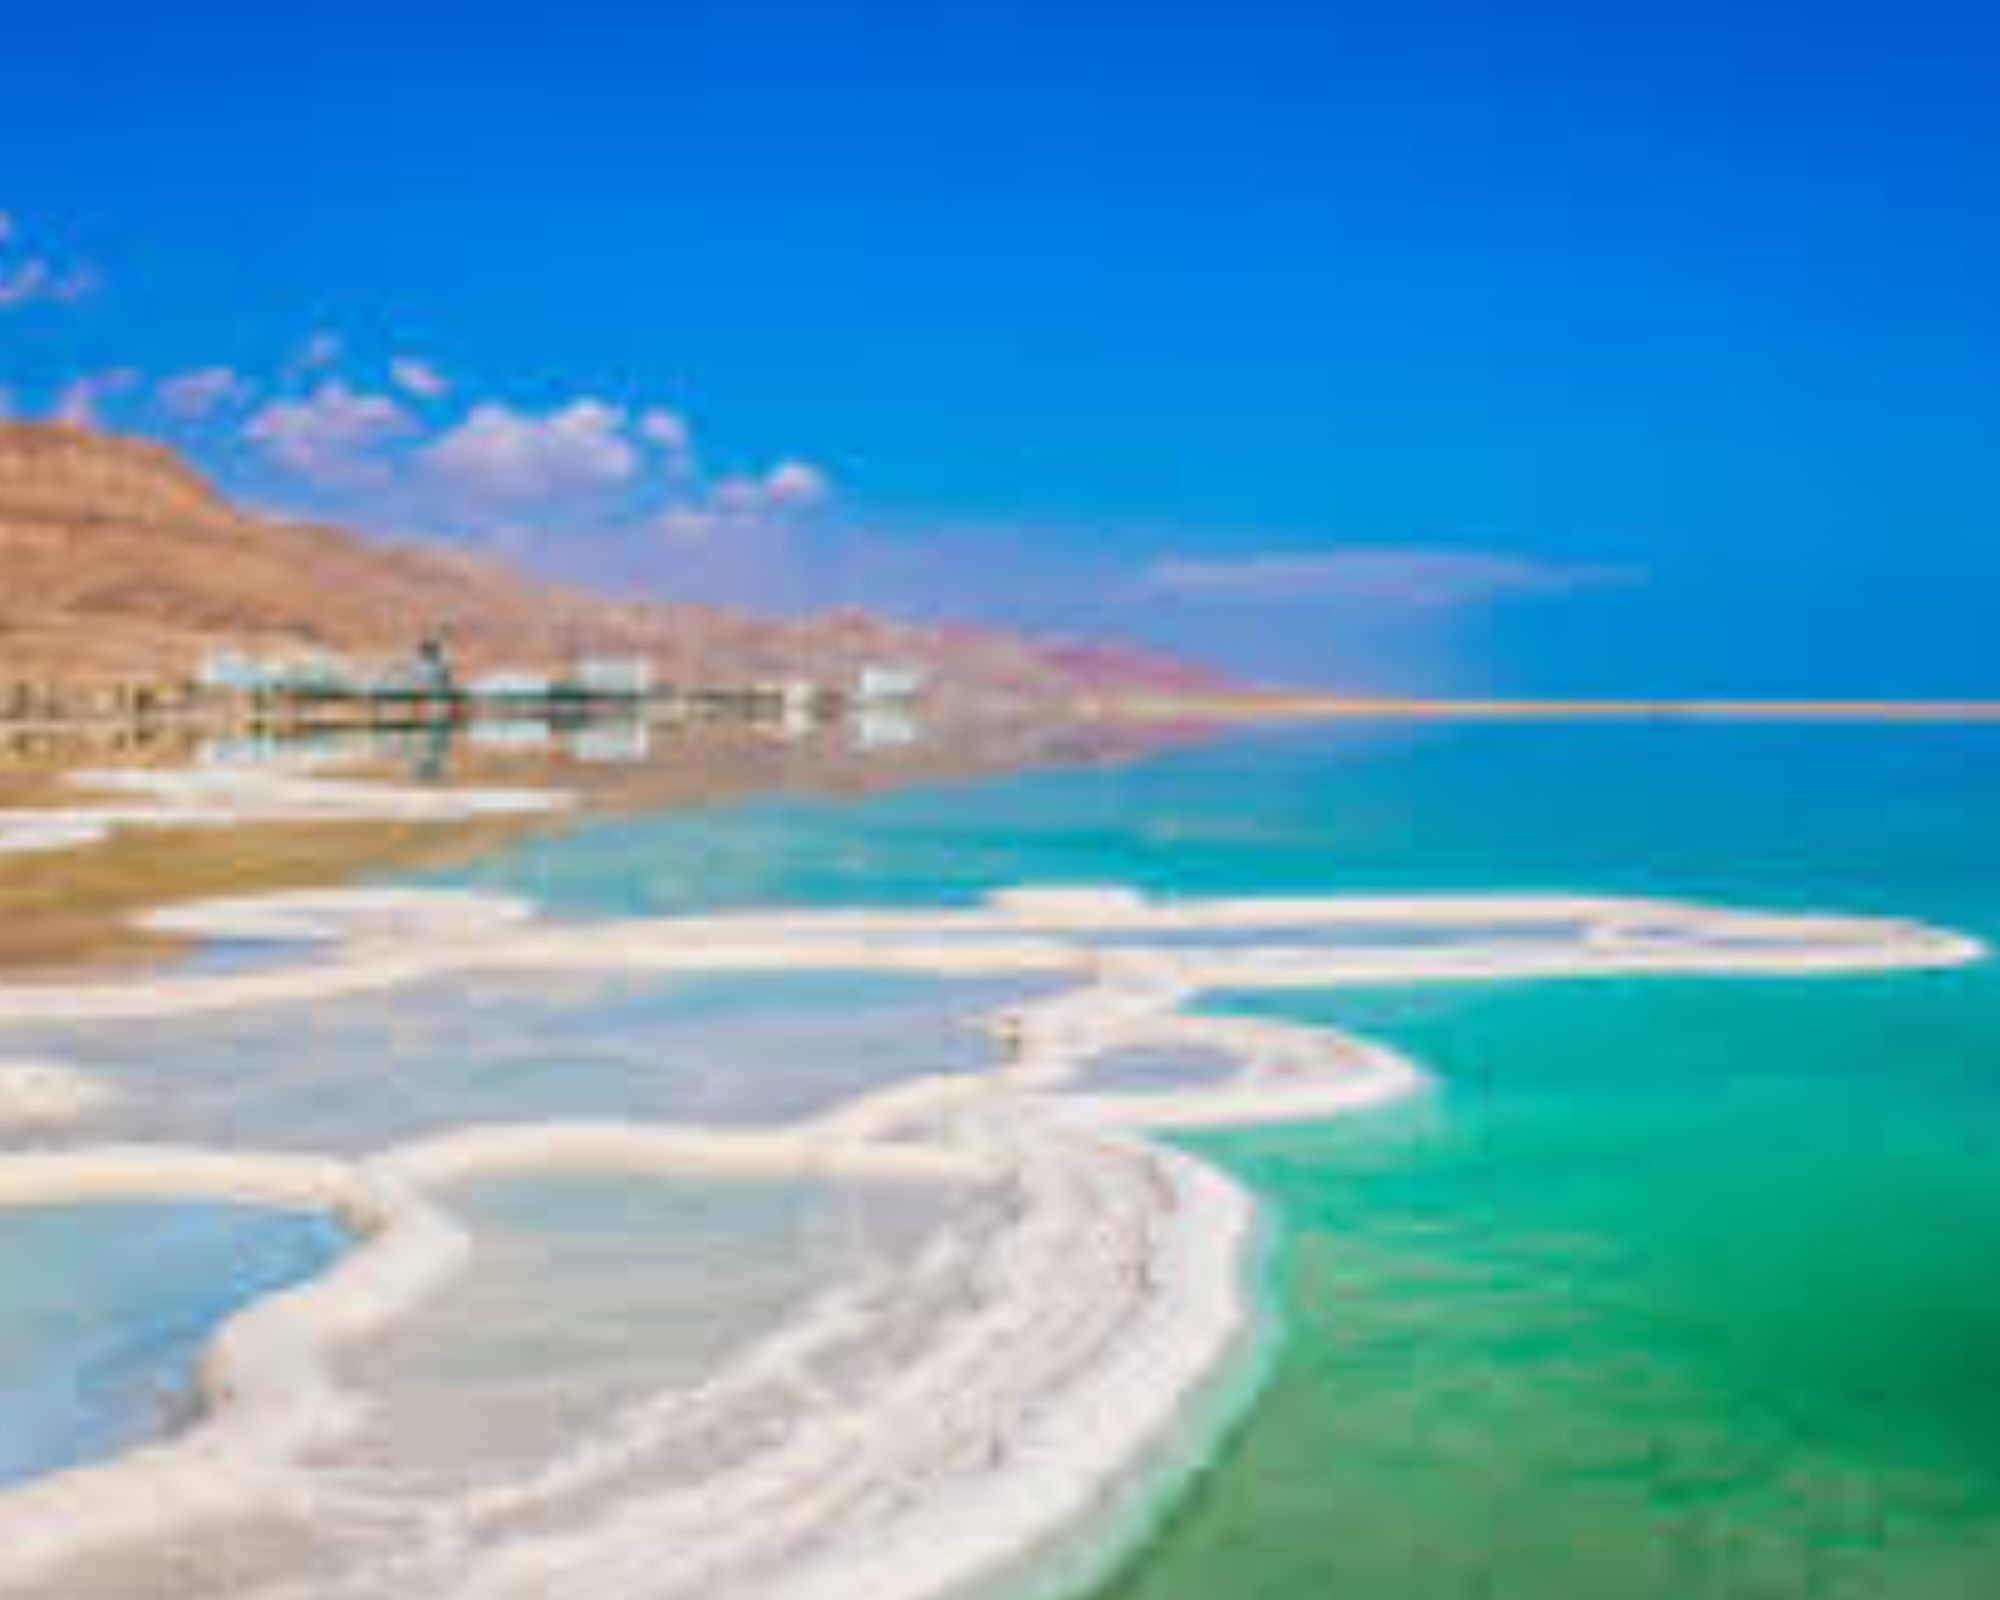 The Dead Sea: A Natural Wonder with Unique Features and Ancient History